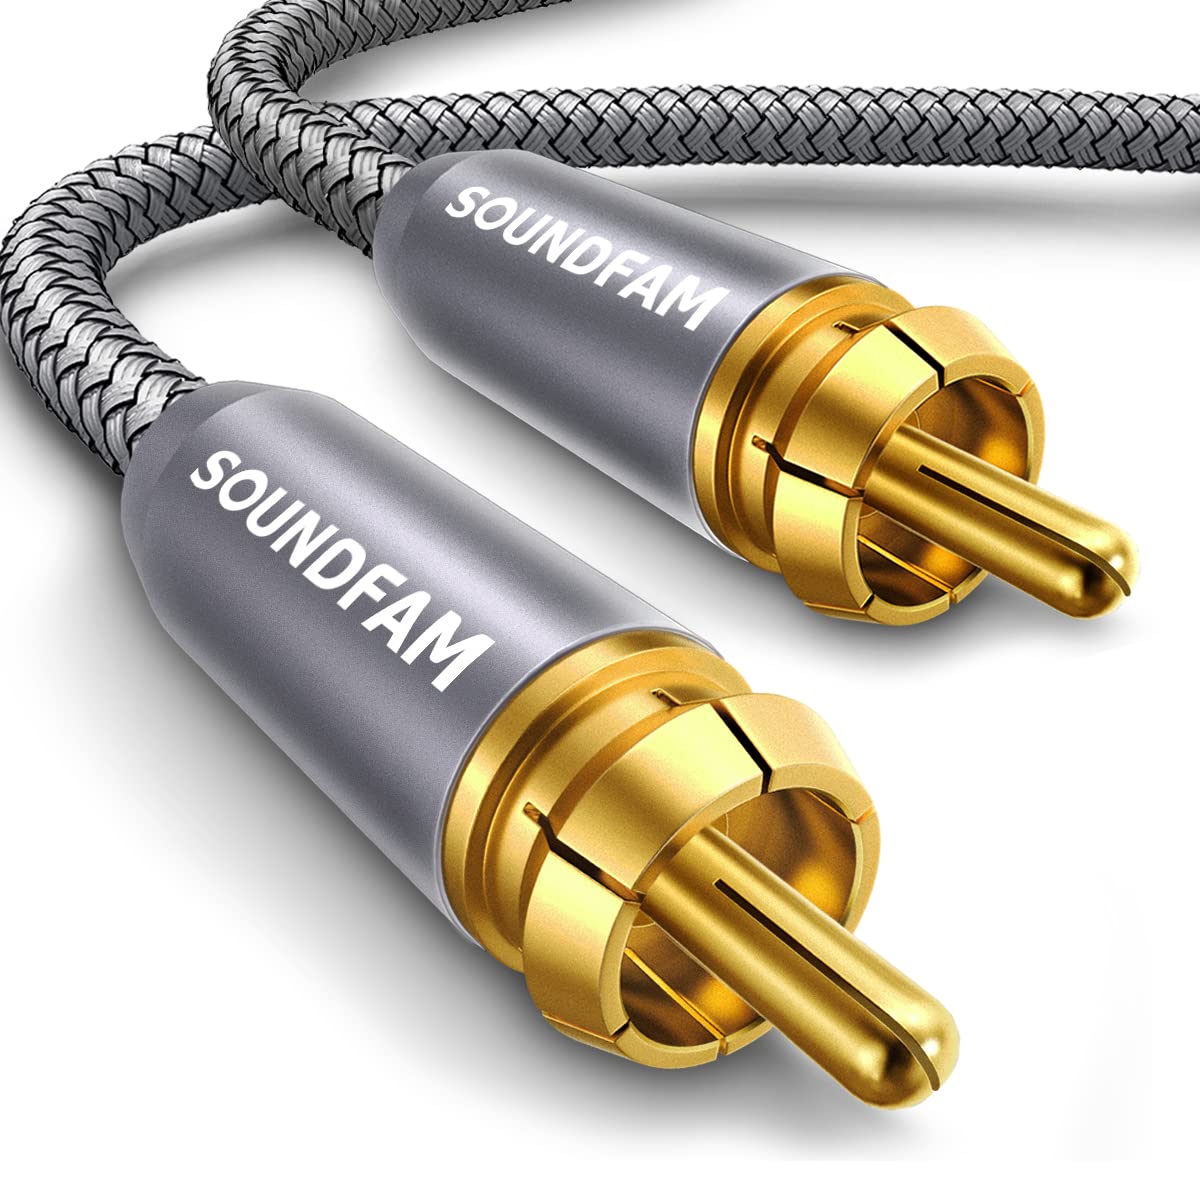 RCA Subwoofer Cable SOUNDFAM Digital Coaxial Audio Cable Gold Plated RCA Male to Male SPDIF Cable for Subwoofer,Home Theater,Amplifier,TV and More-Grey(16ft/5m)